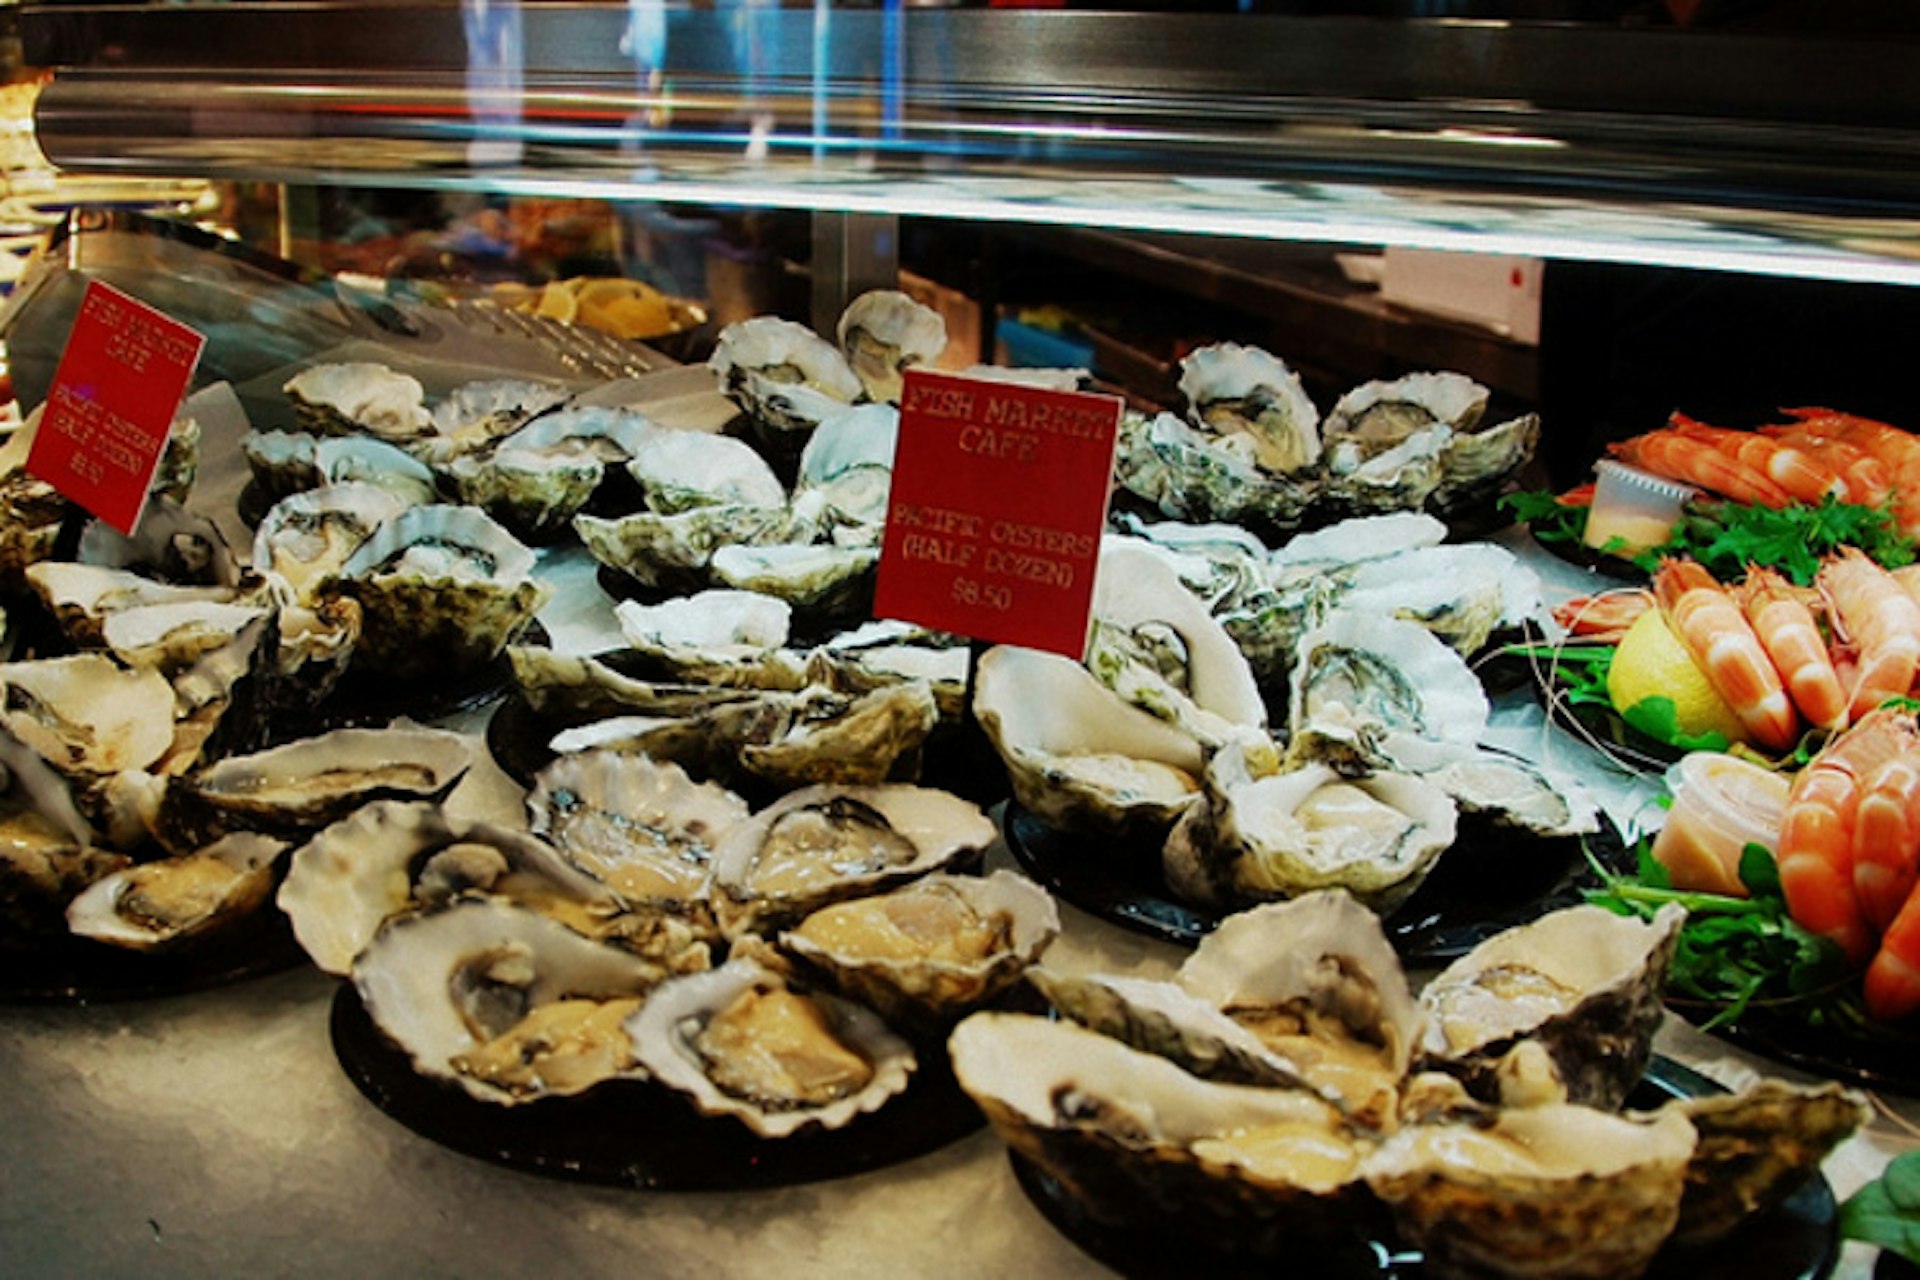 Oysters at the Sydney Fish Market / Image by LWYang / CC BY 2.0